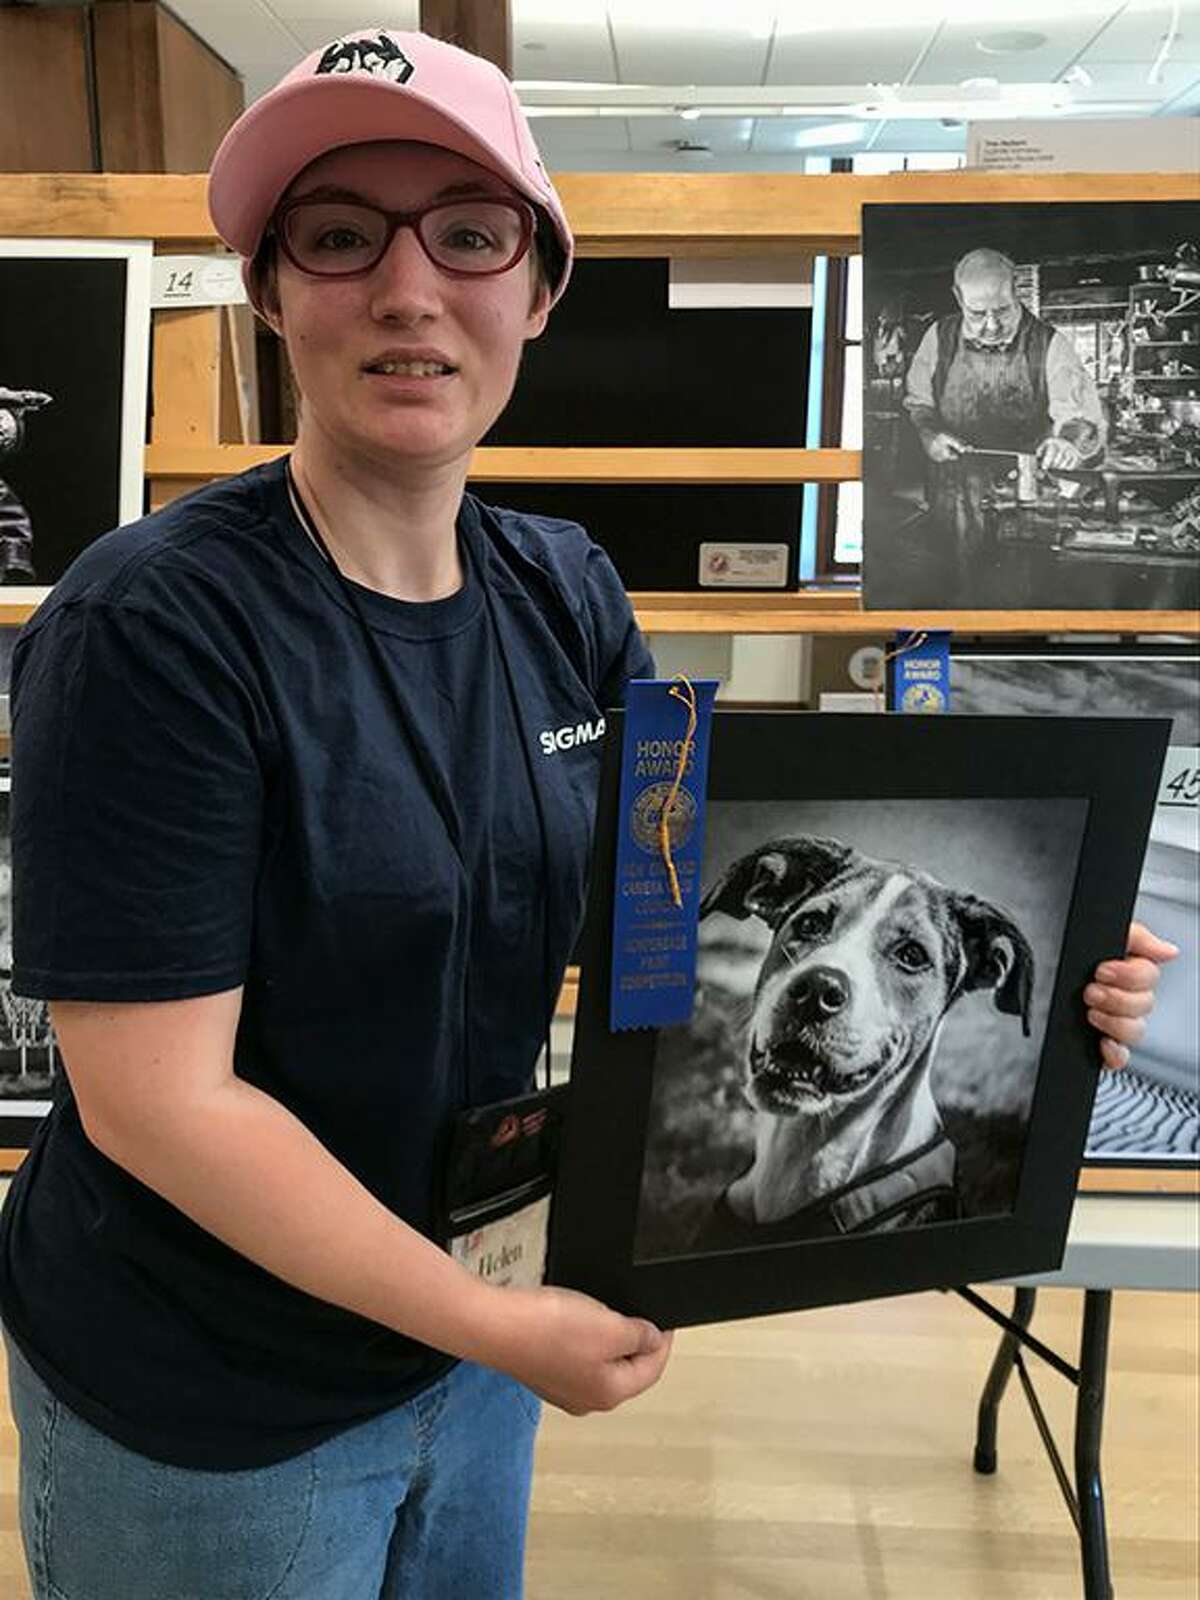 North Haven Camera Club member Helen Pappas won a New England Camera Club Council (NECCC) Honor Award for her photo print of a friend's dog. NECCC is displaying Pappas' photo at numerous locations around New England.